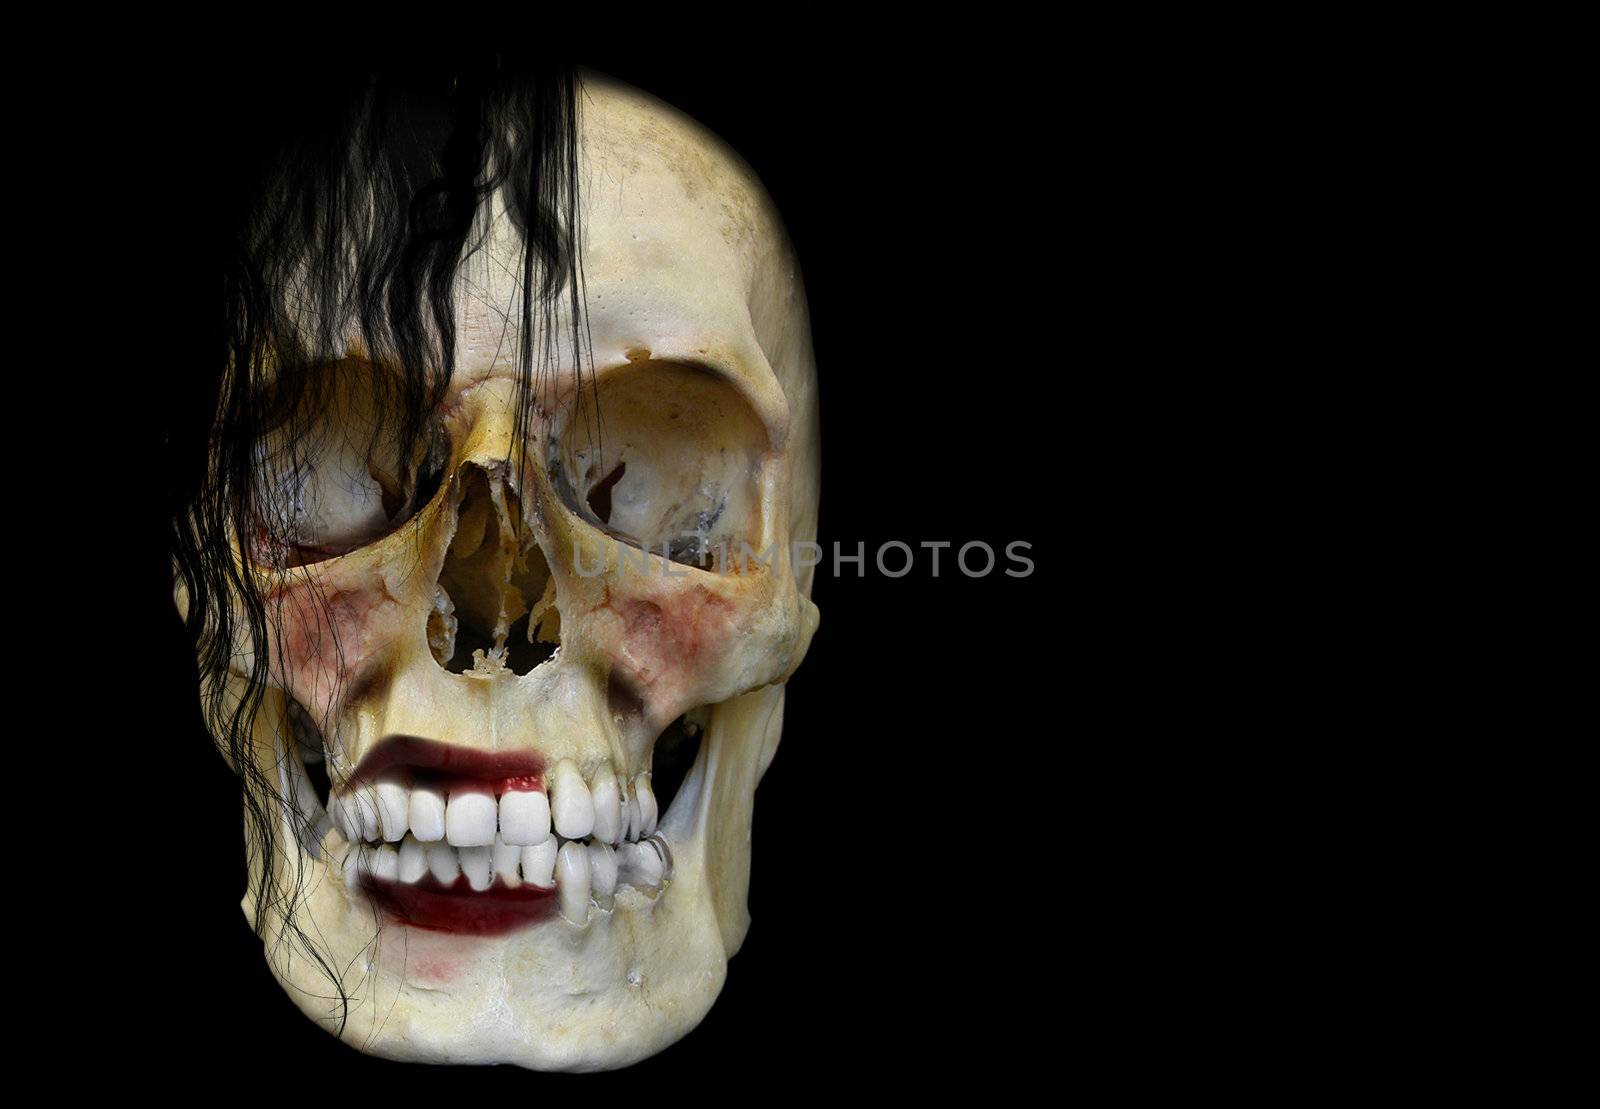 A female human skull portraying the concept that beauty is only skin deep after all.